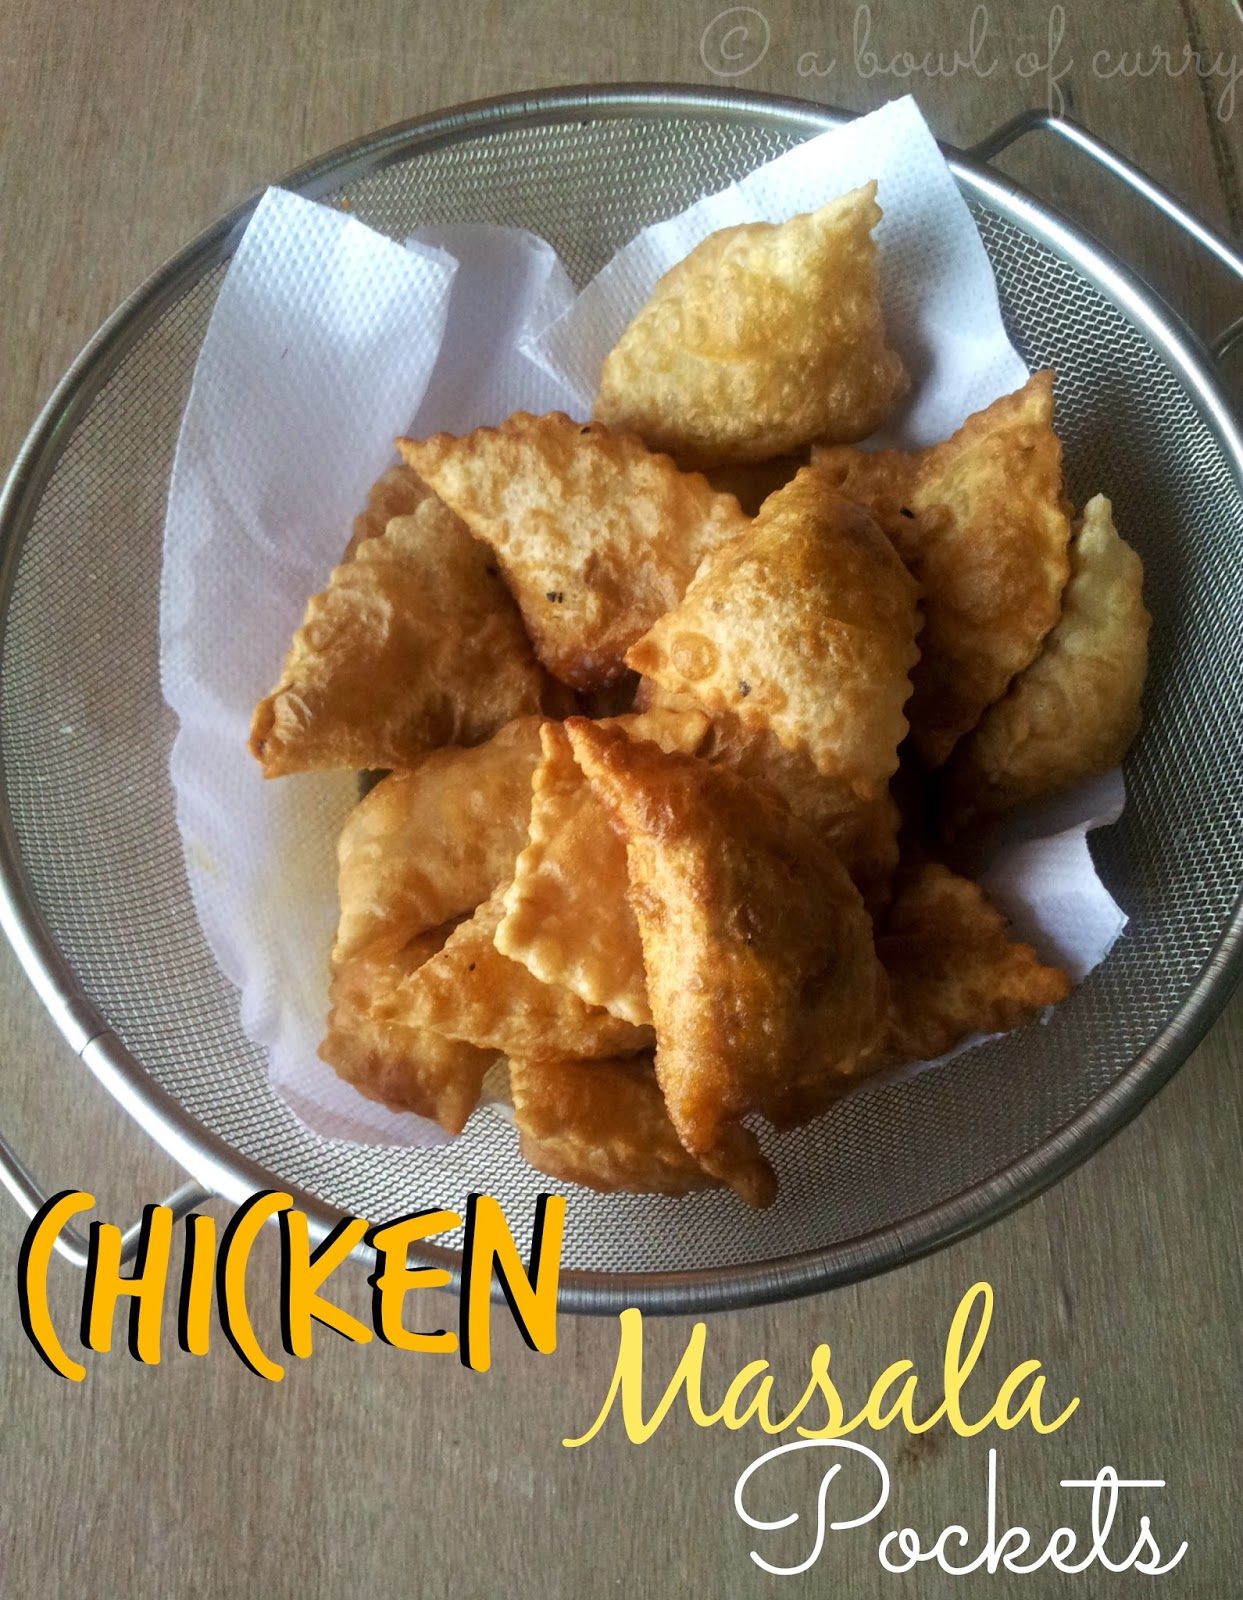 A Bowl Of Curry: Chicken Masala Pockets